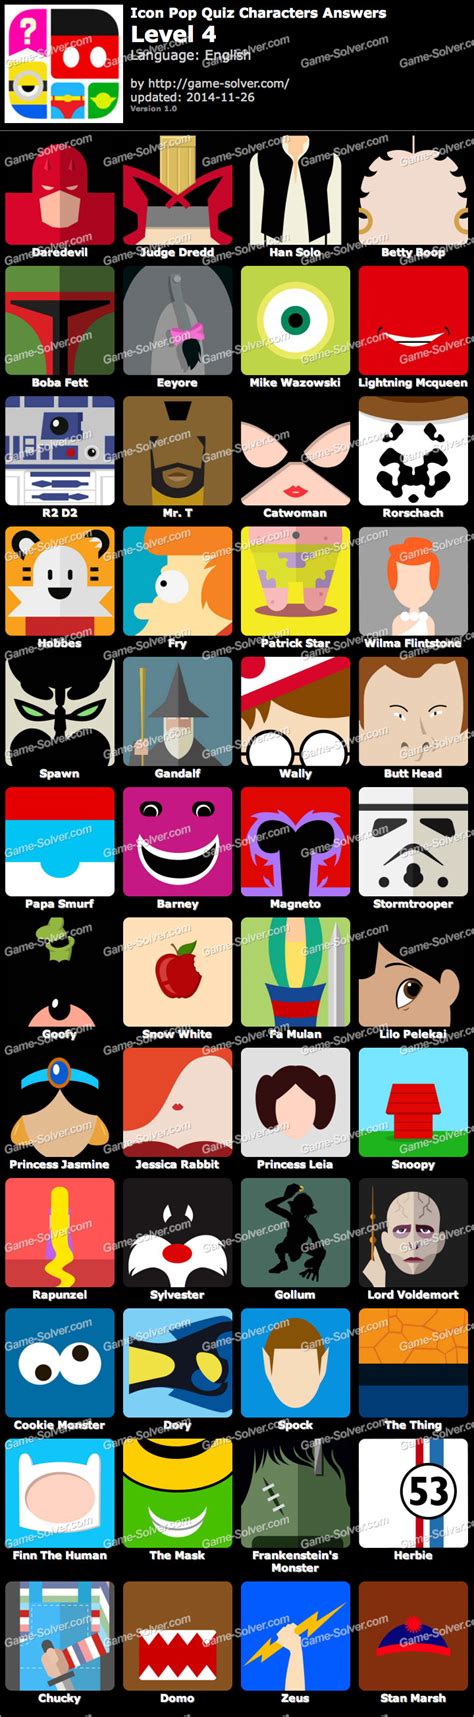 Icon Pop Quiz Characters Level 4 Game Solver